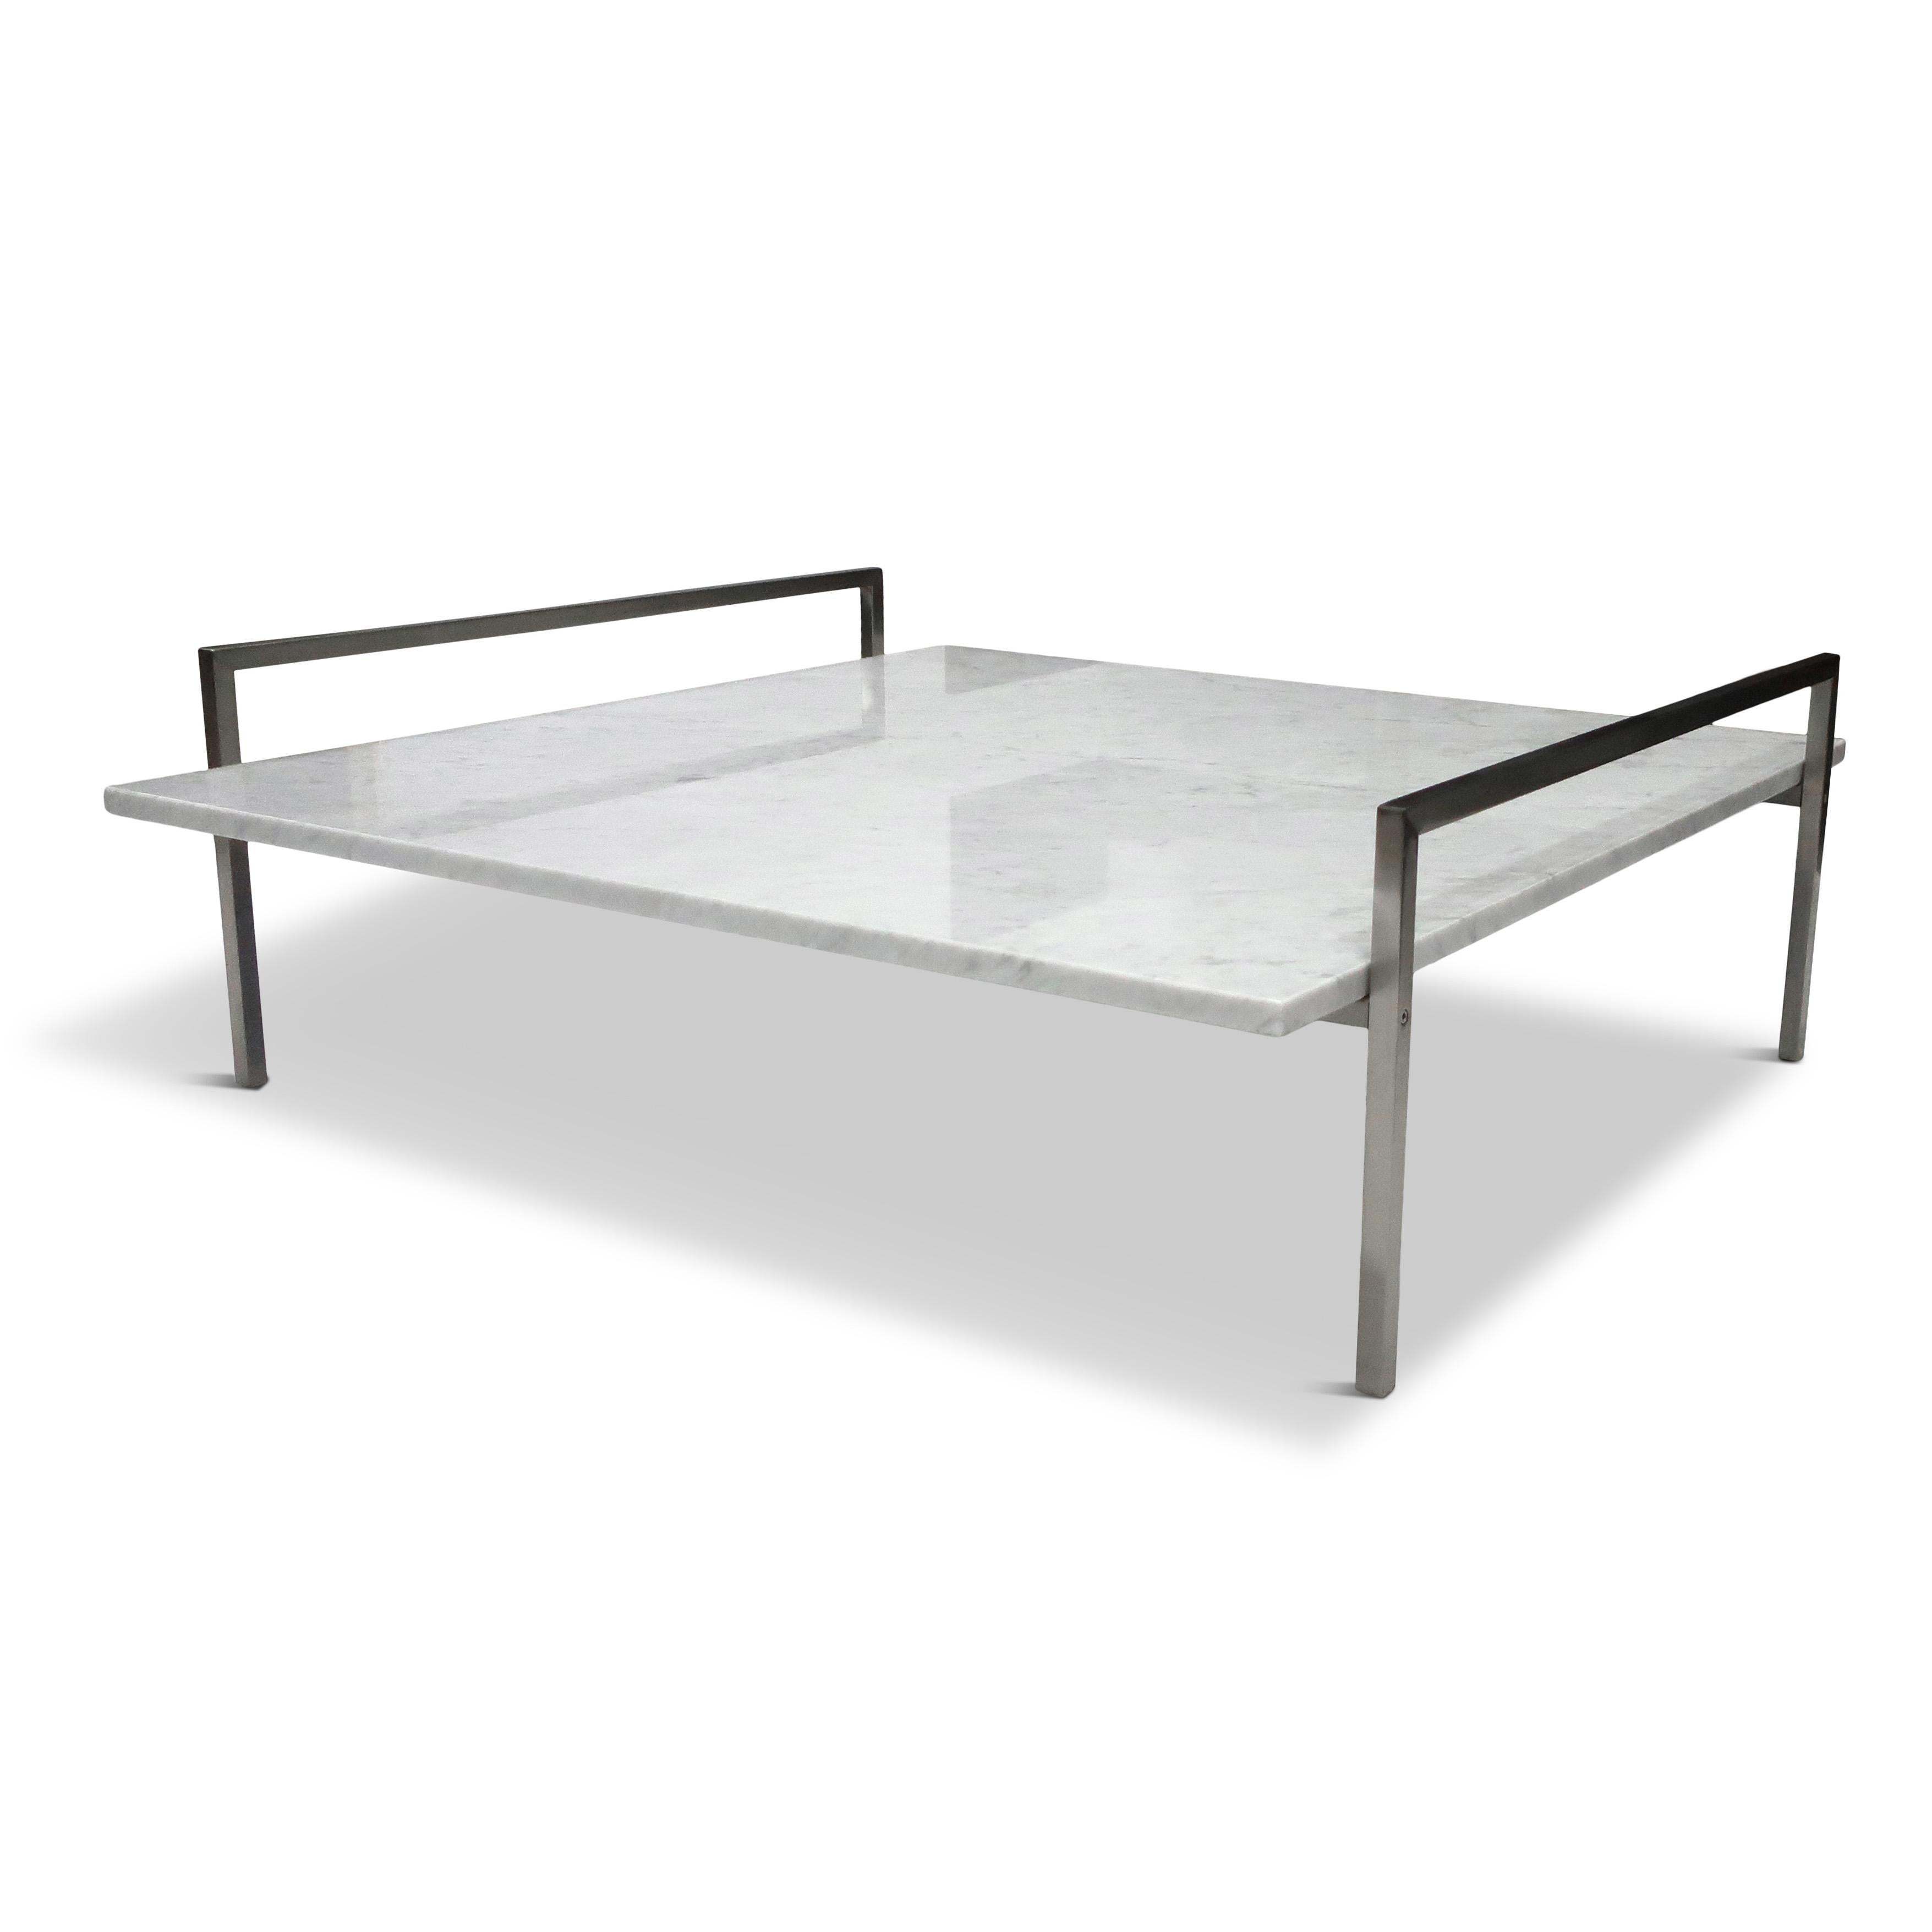 A sleek and sophisticated coffee table designed by Prospero Rasulo for Zanotta and made in Italy. Cleverly named the Skinny table it has a slim nickel-plated steel frame with a beautiful and richly veined square Carrara marble table top. 

Rasulo